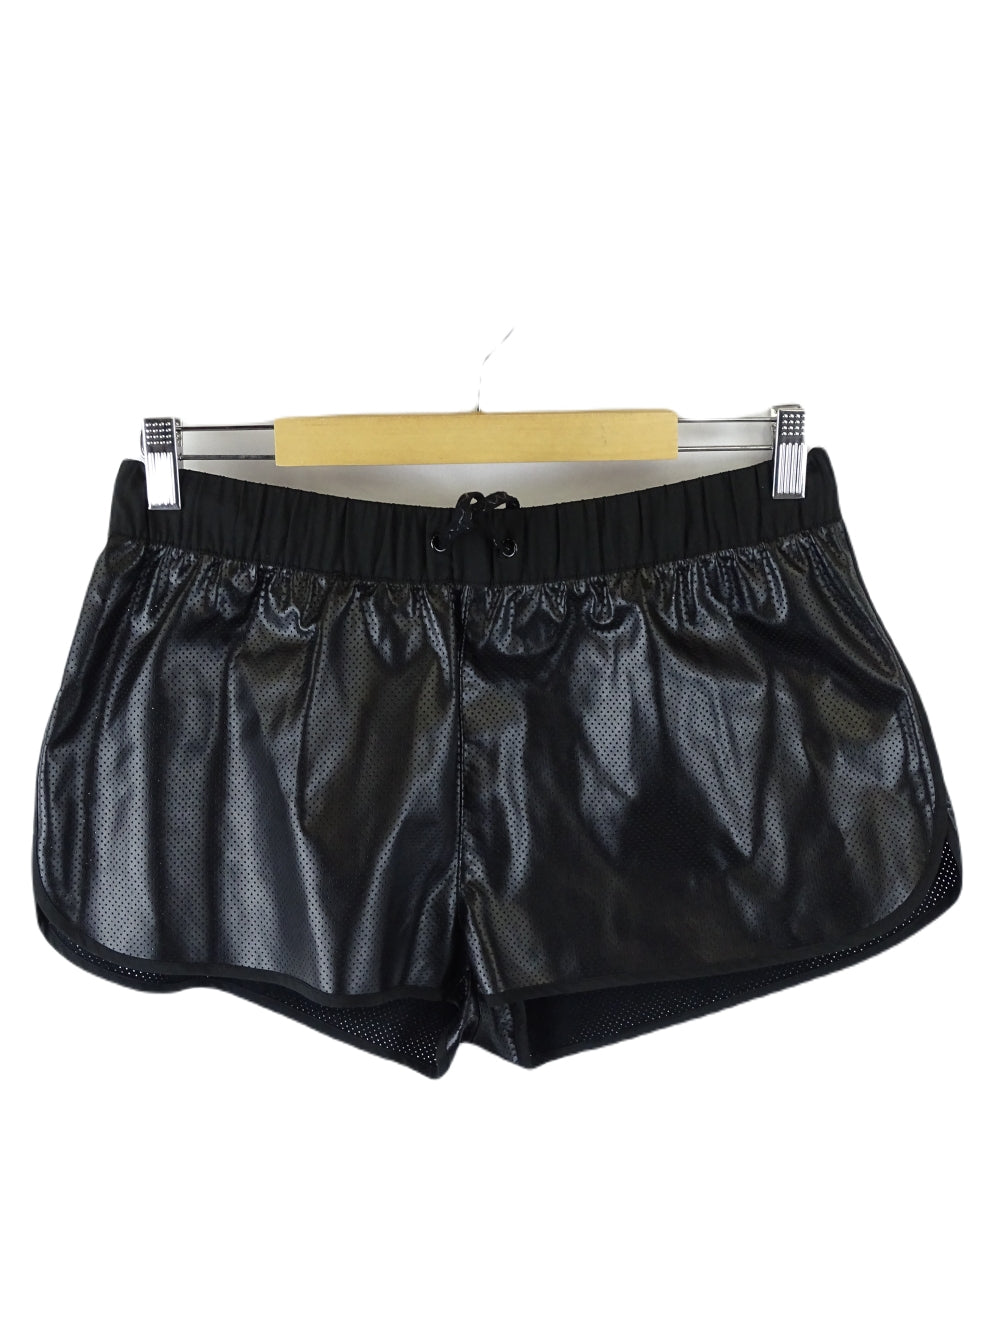 Seafolly Black Faux Leather Shorts S